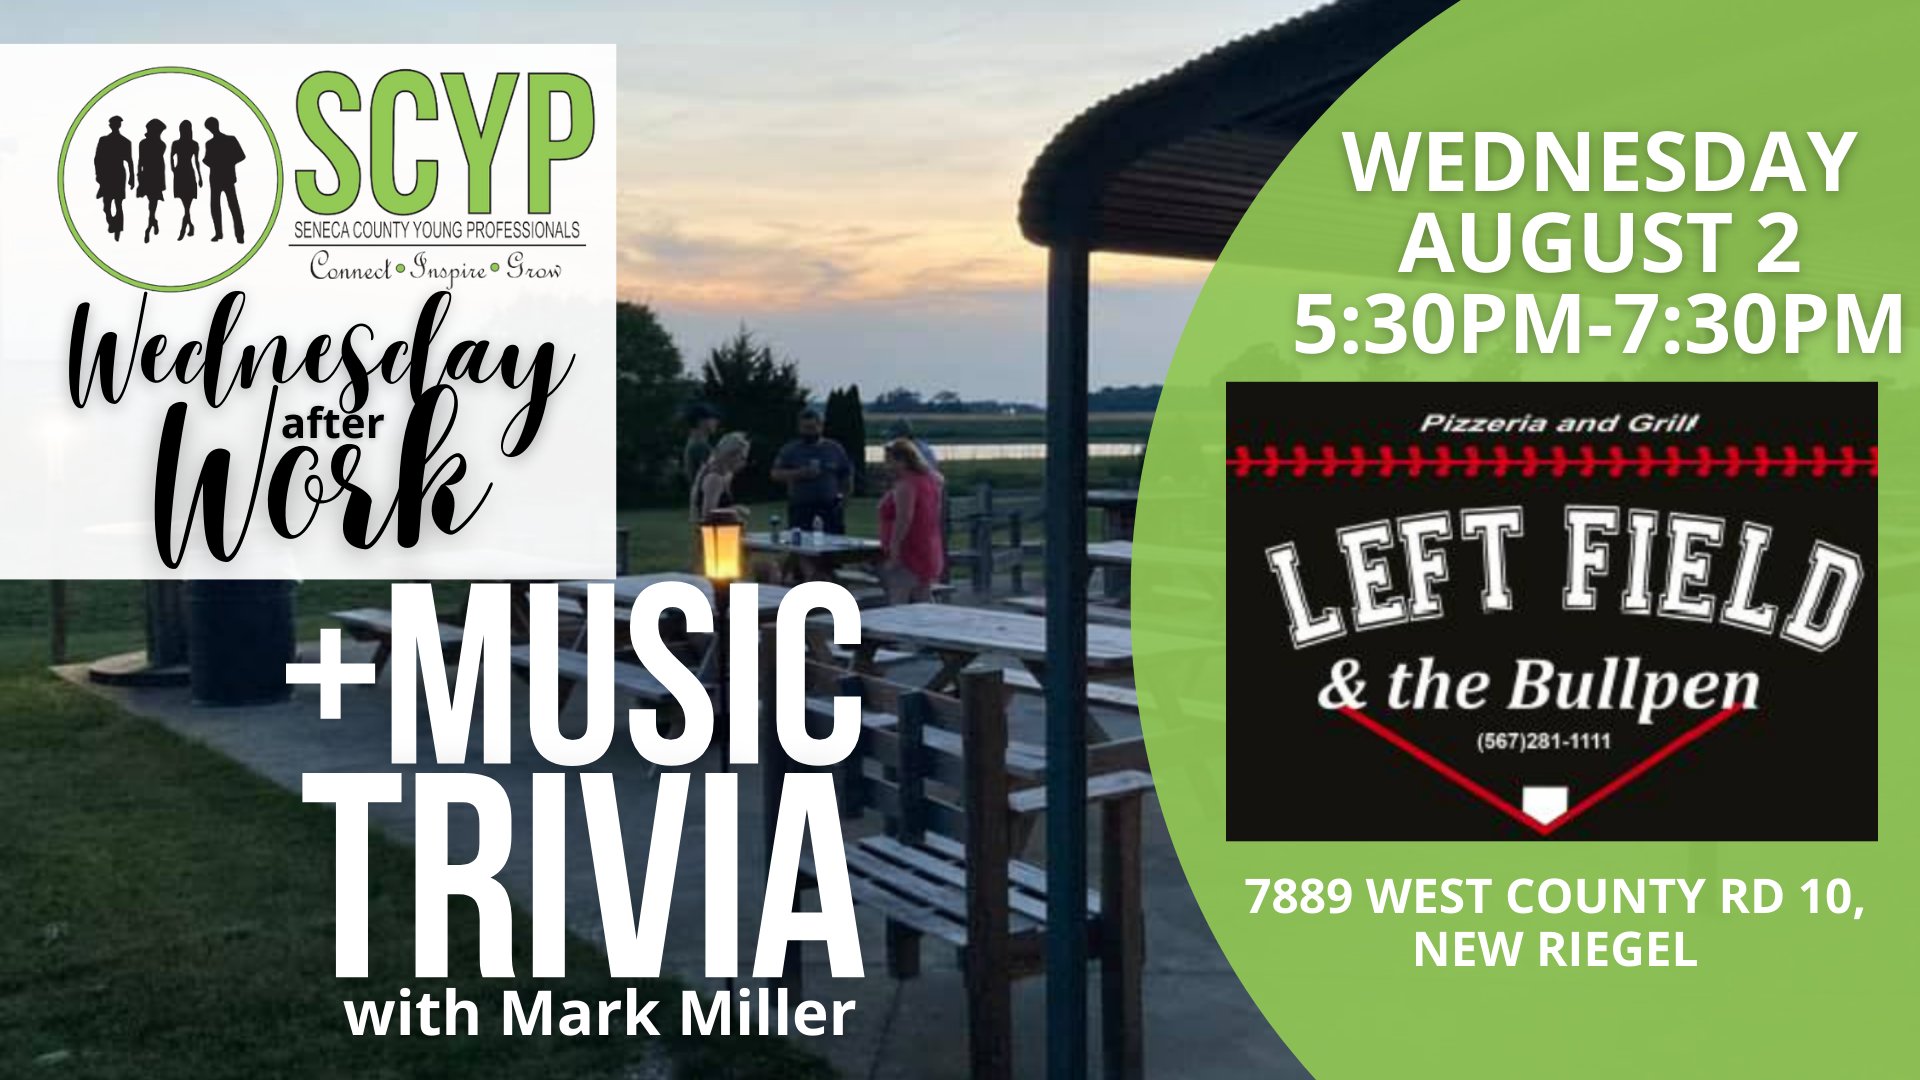 Wednesday After Work + Music Trivia